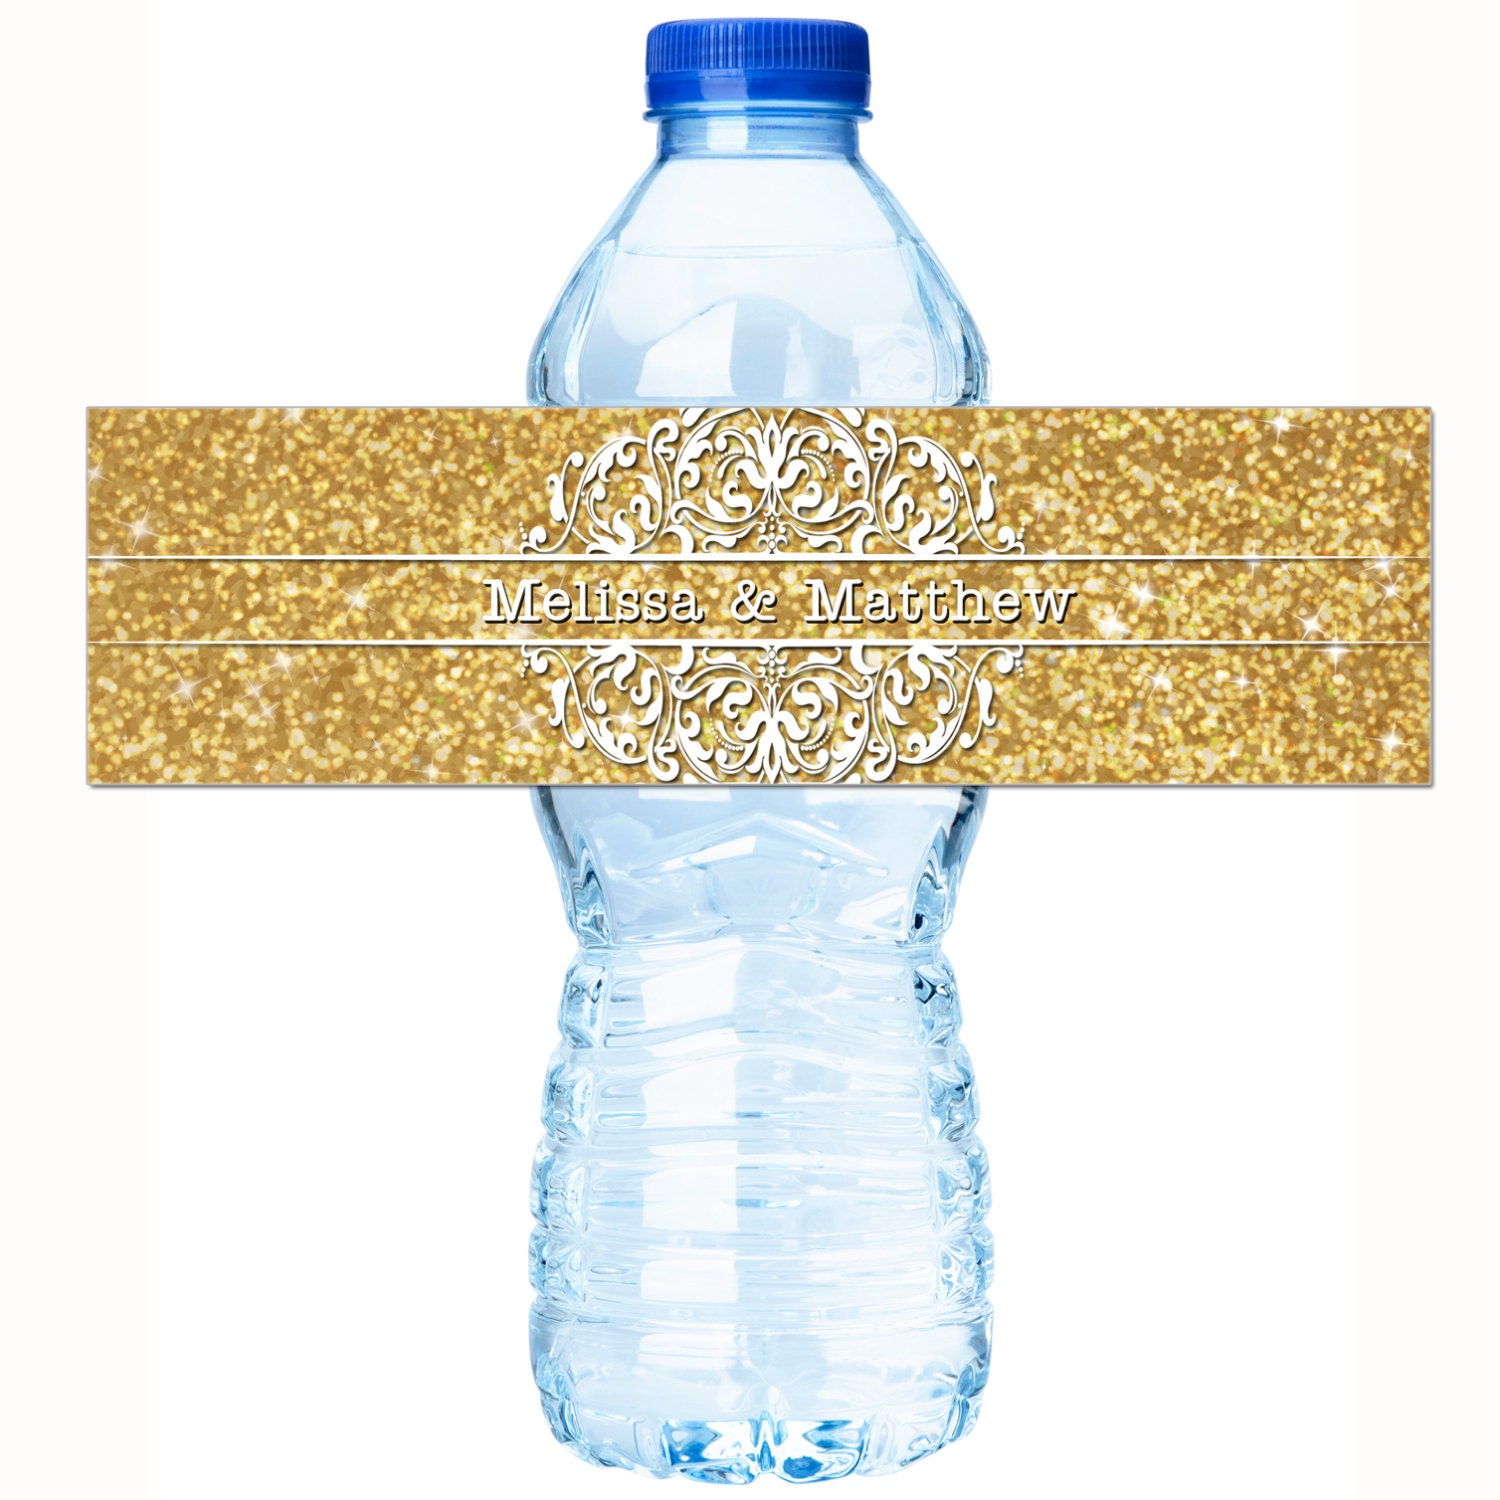 30 Wedding Water Bottle Labels, Personalized Gold Glitter & Lace Welcome Bags